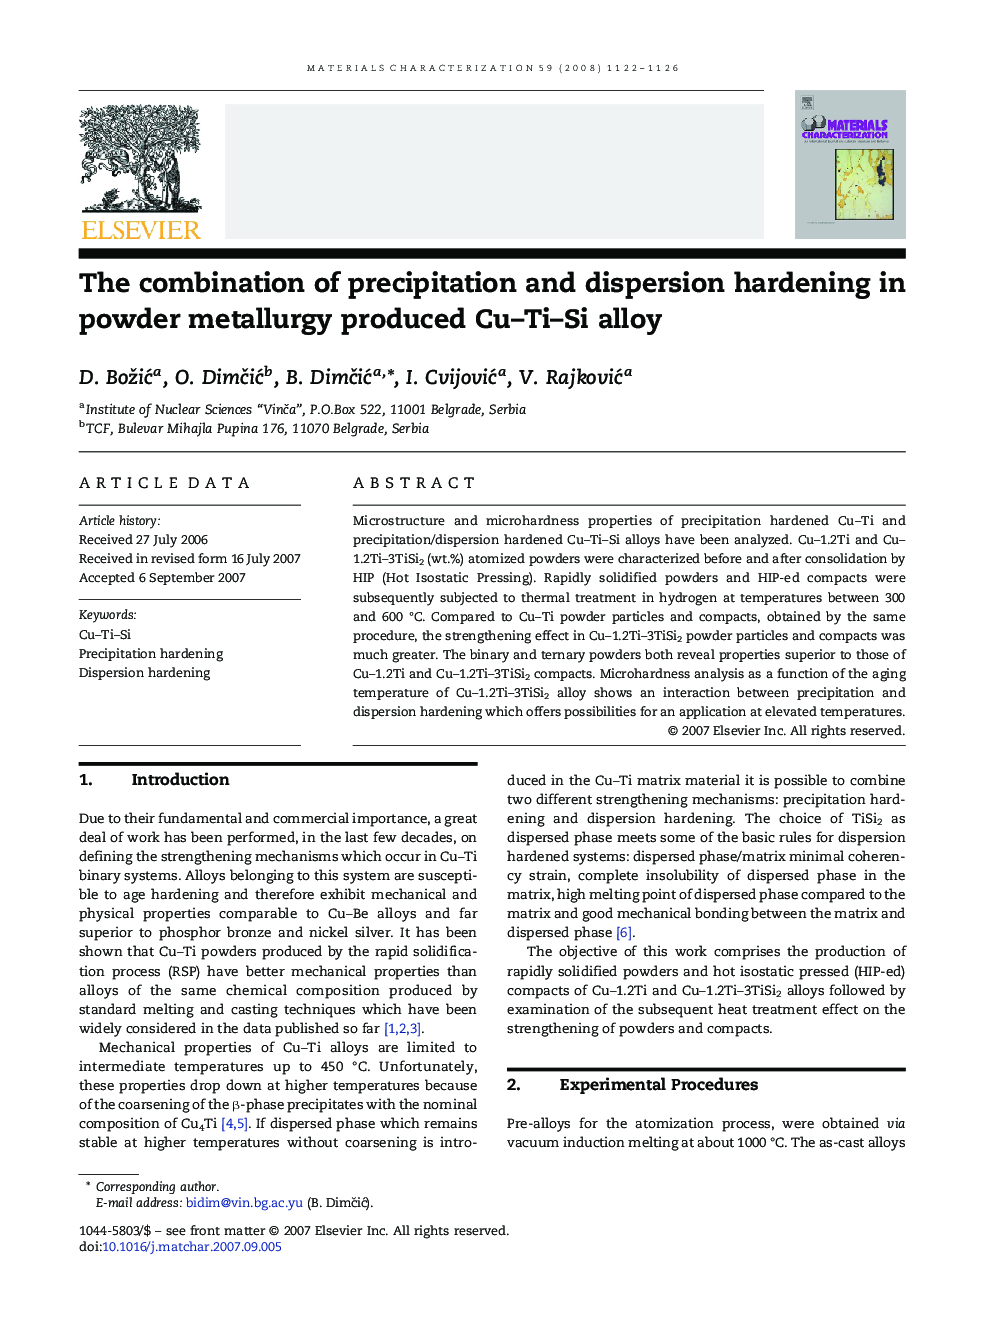 The combination of precipitation and dispersion hardening in powder metallurgy produced Cu-Ti-Si alloy